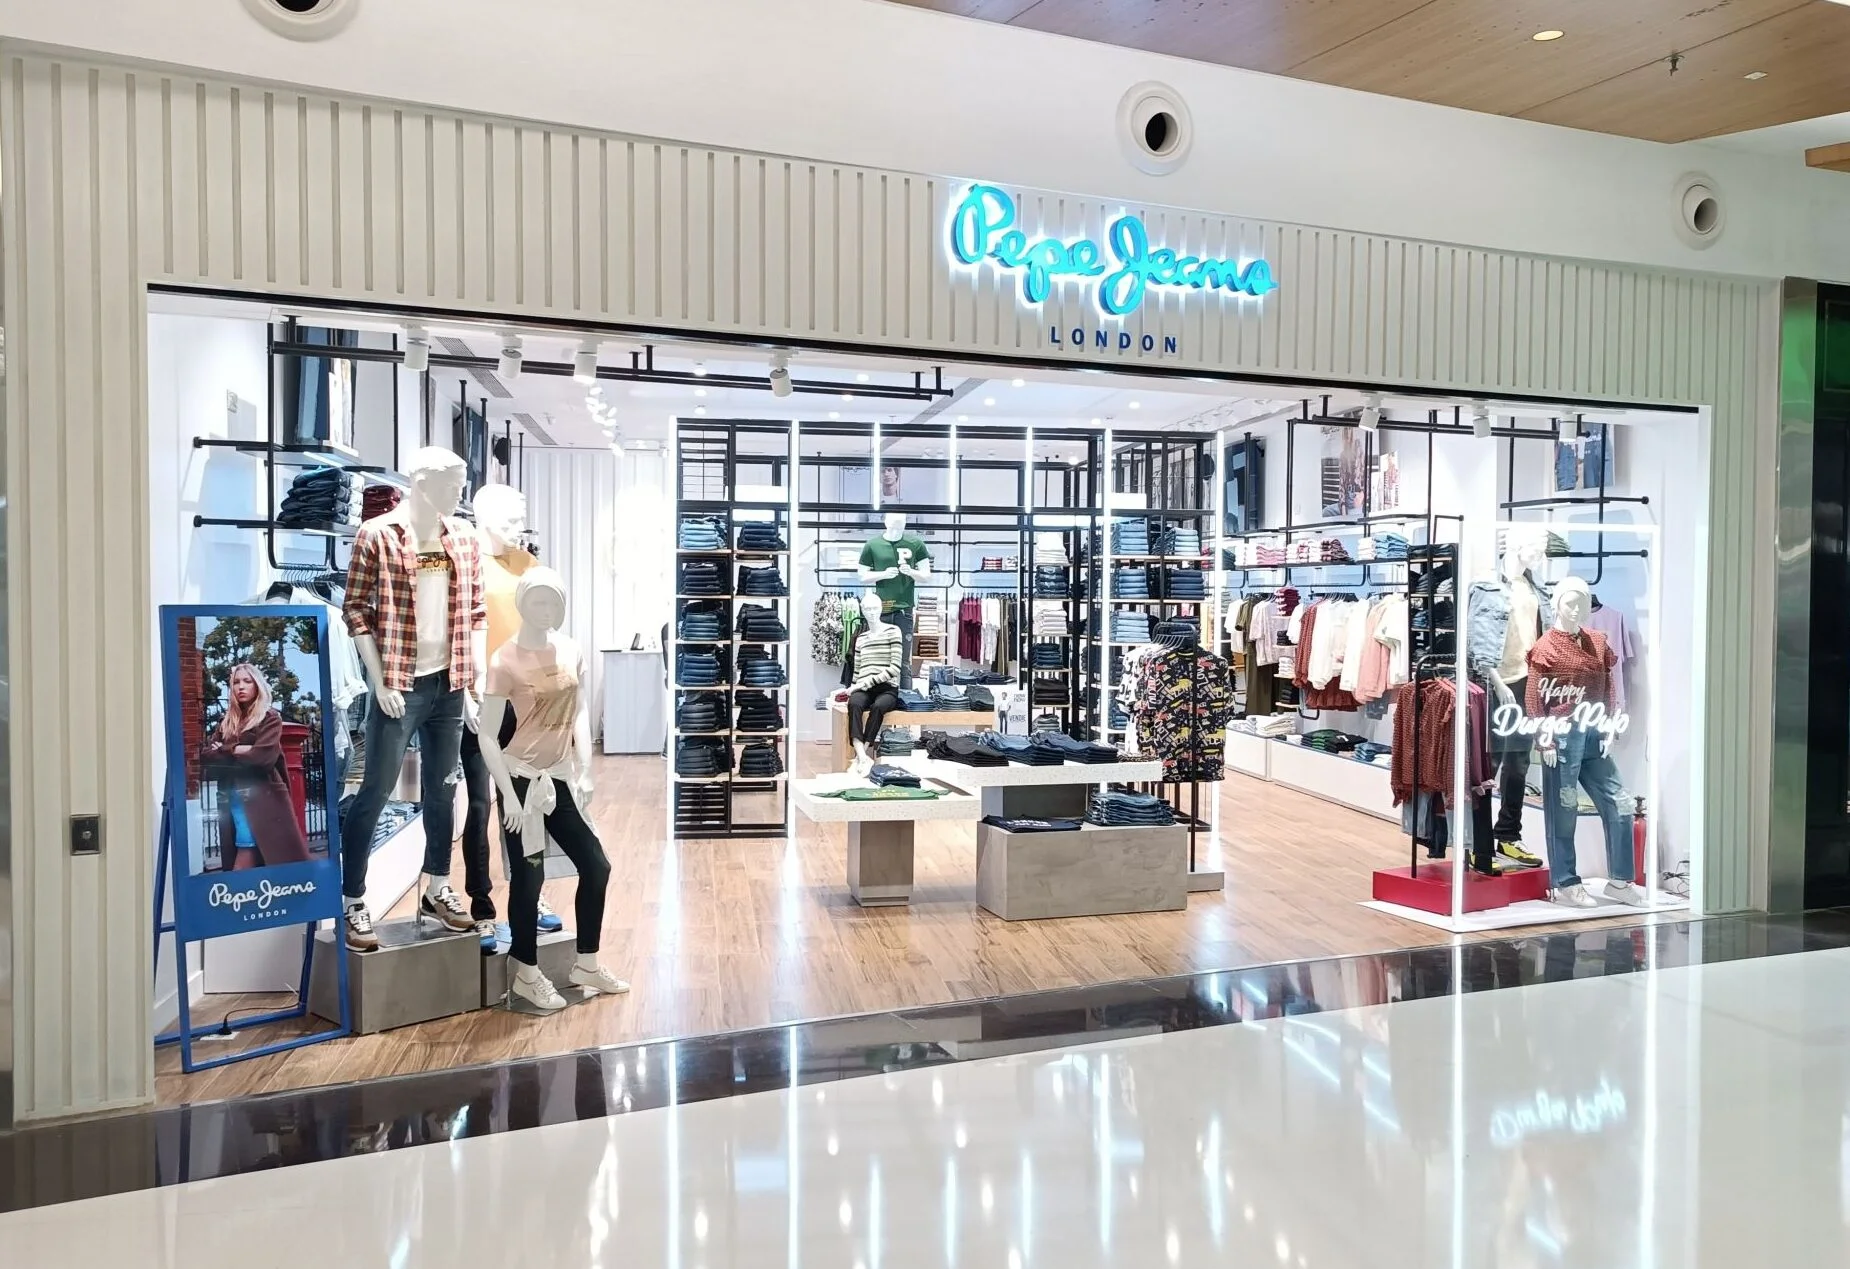 Pepe Jeans aims Rs 2,000 cr sales in next 3 years, to add over 100 stores